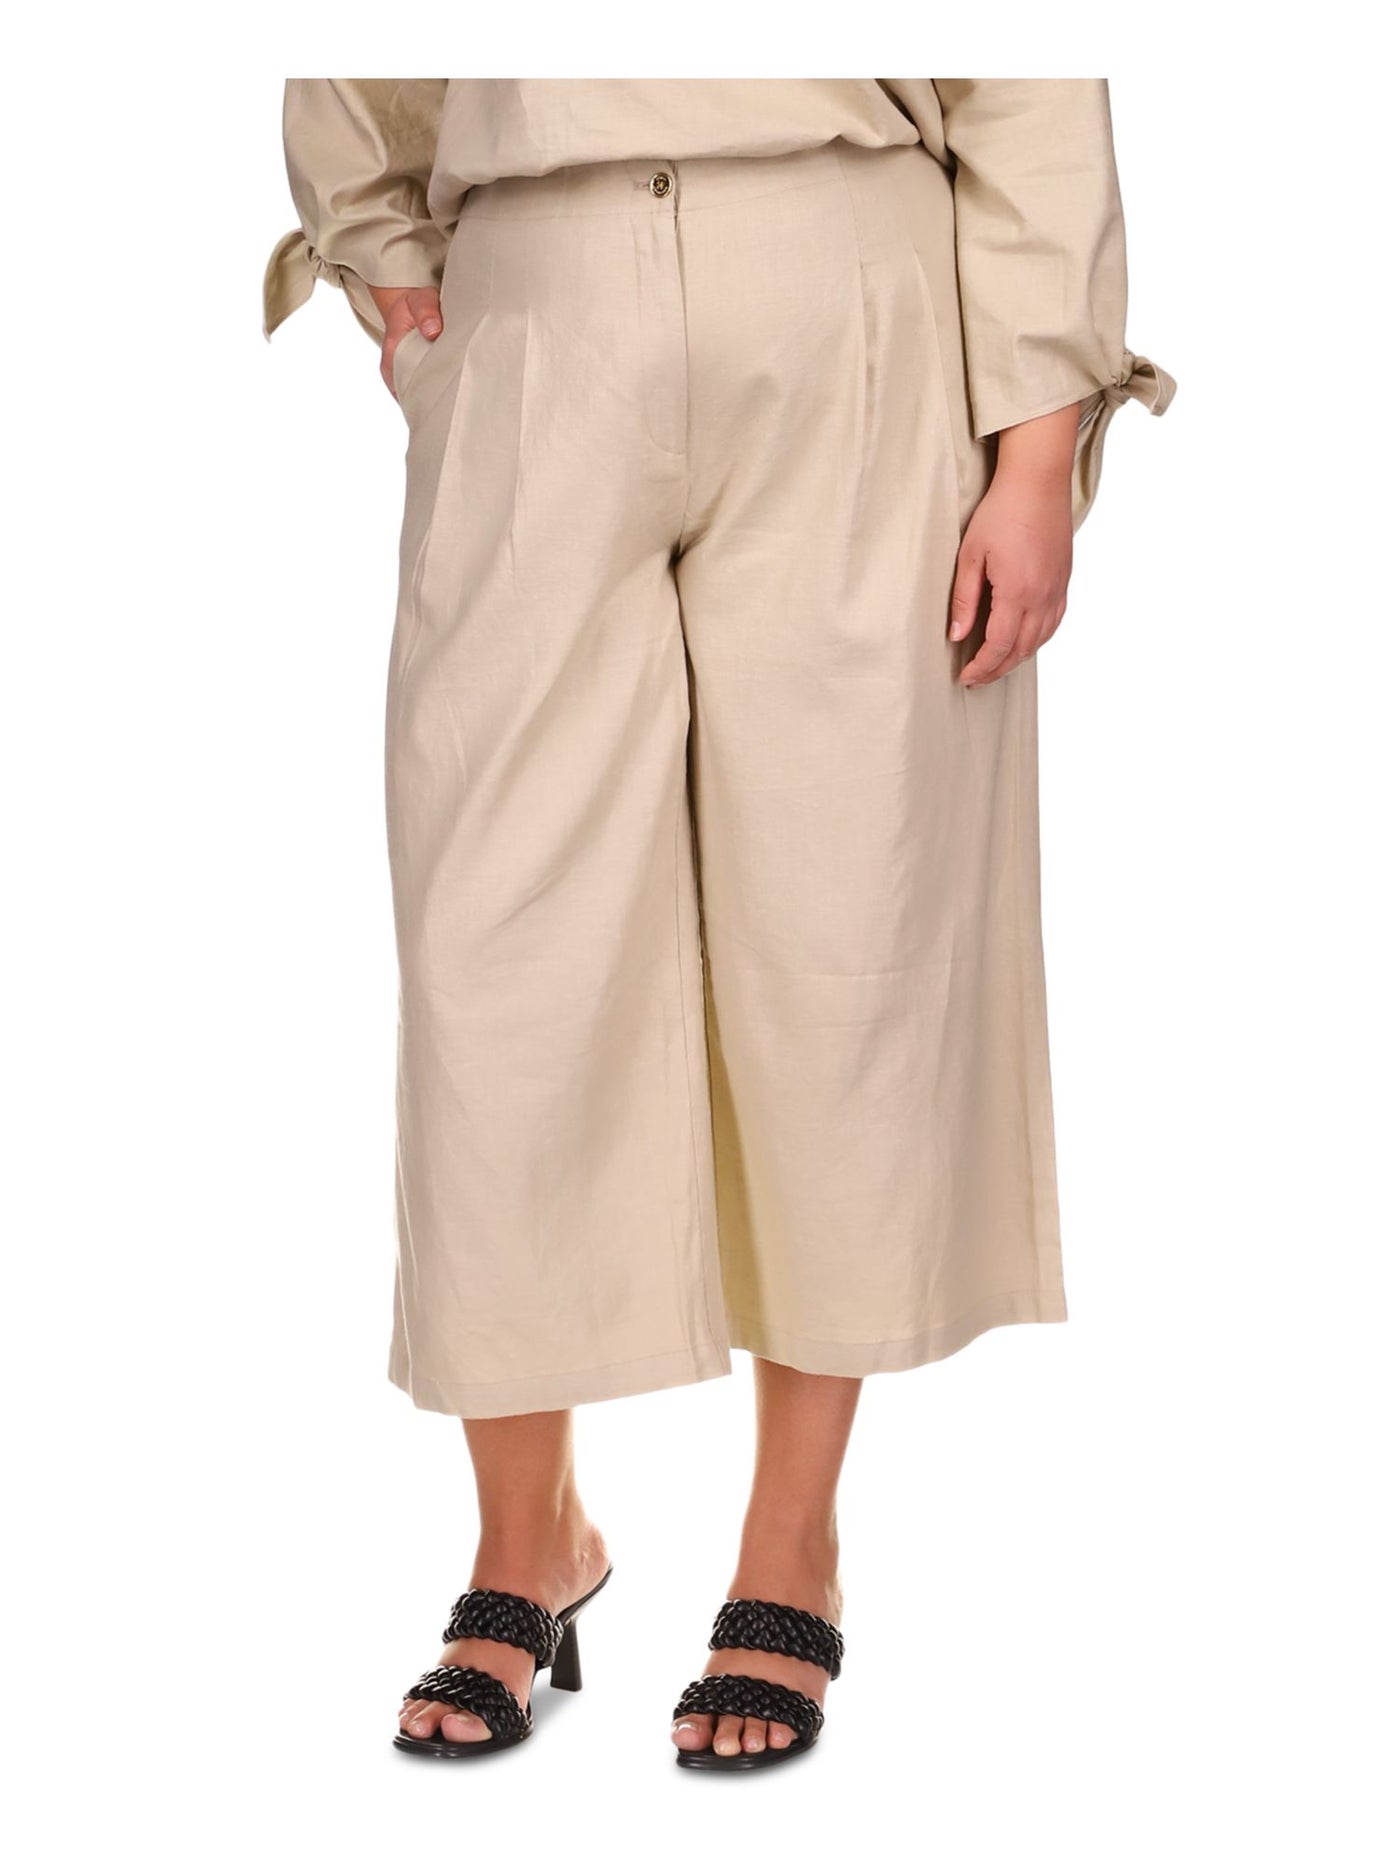 MICHAEL MICHAEL KORS Womens Beige Zippered Pocketed Cropped Wide Leg Pleated Front Wear To Work High Waist Pants Plus 16W